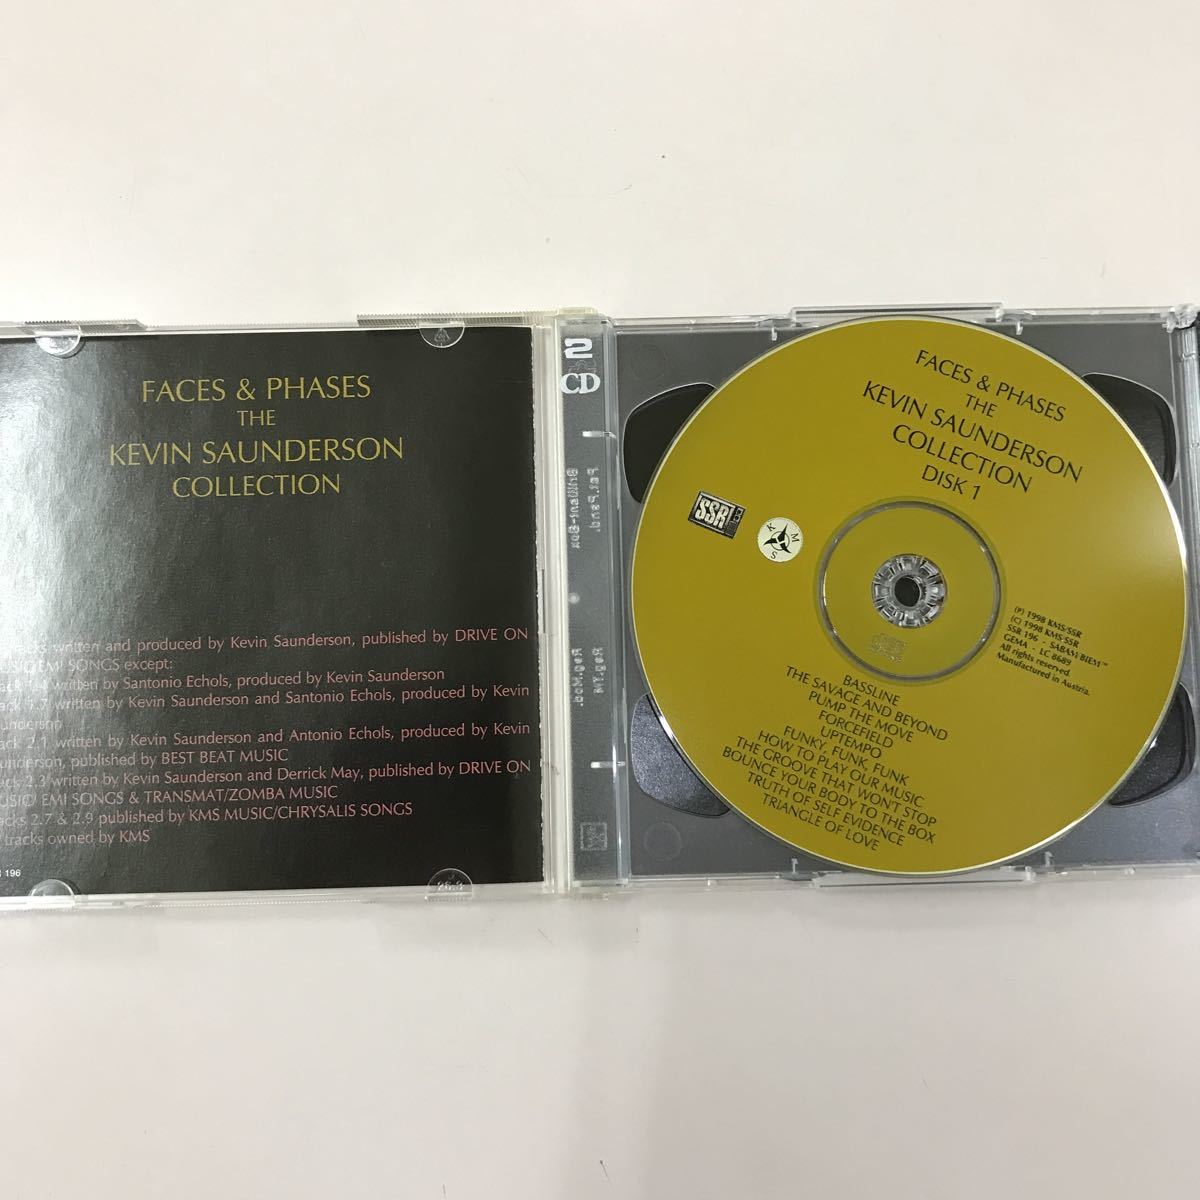 CD 中古☆【洋楽】KEVIN SAUNDRSON FACES&PHASES